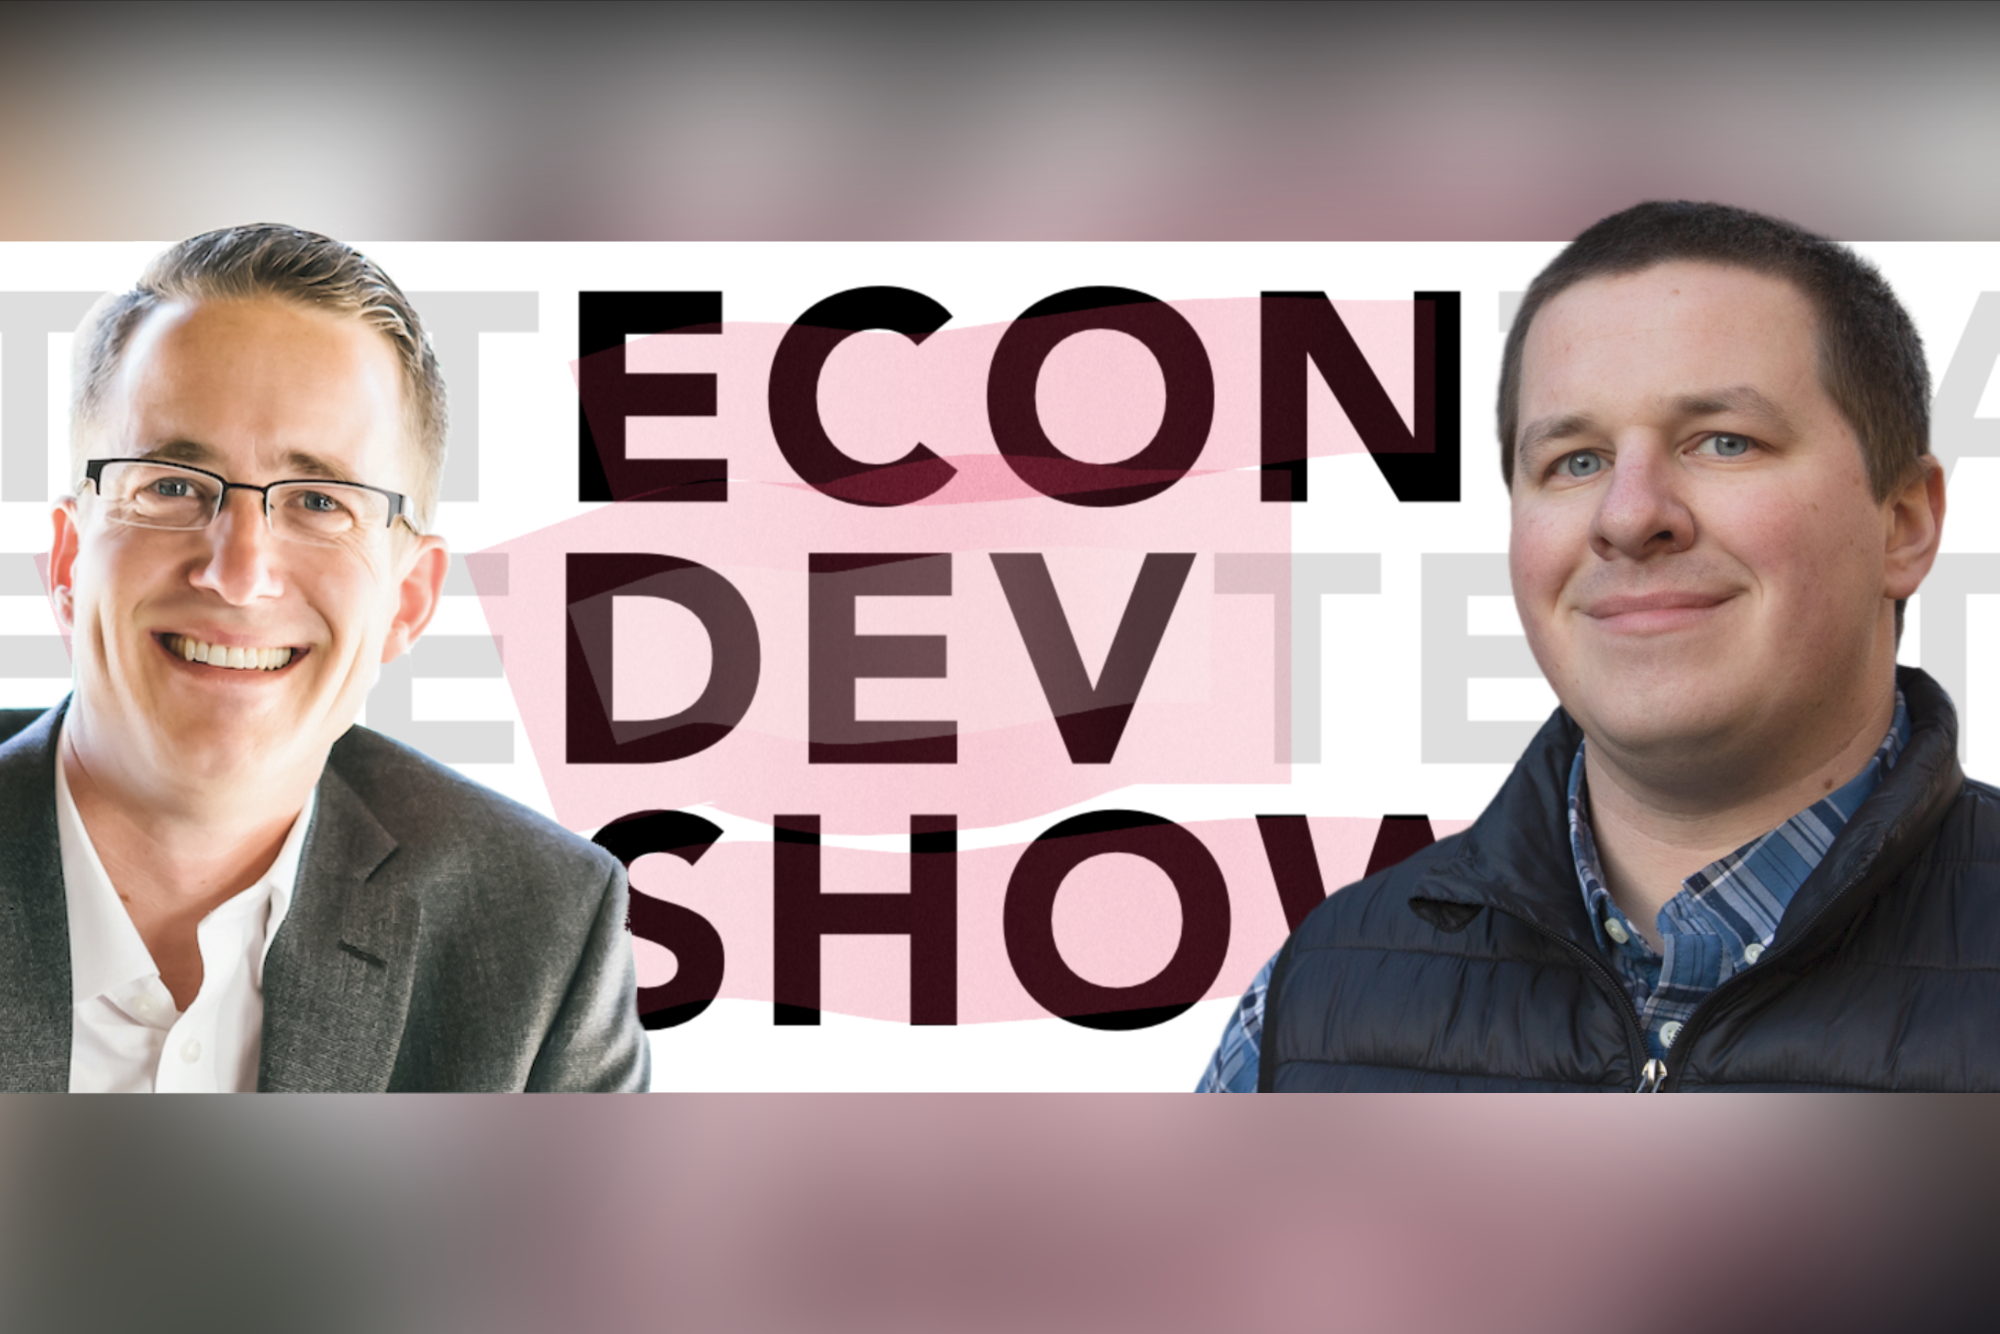 Podcast #83 - Expanding Childcare as an Economic Development Priority with Cody Morrison